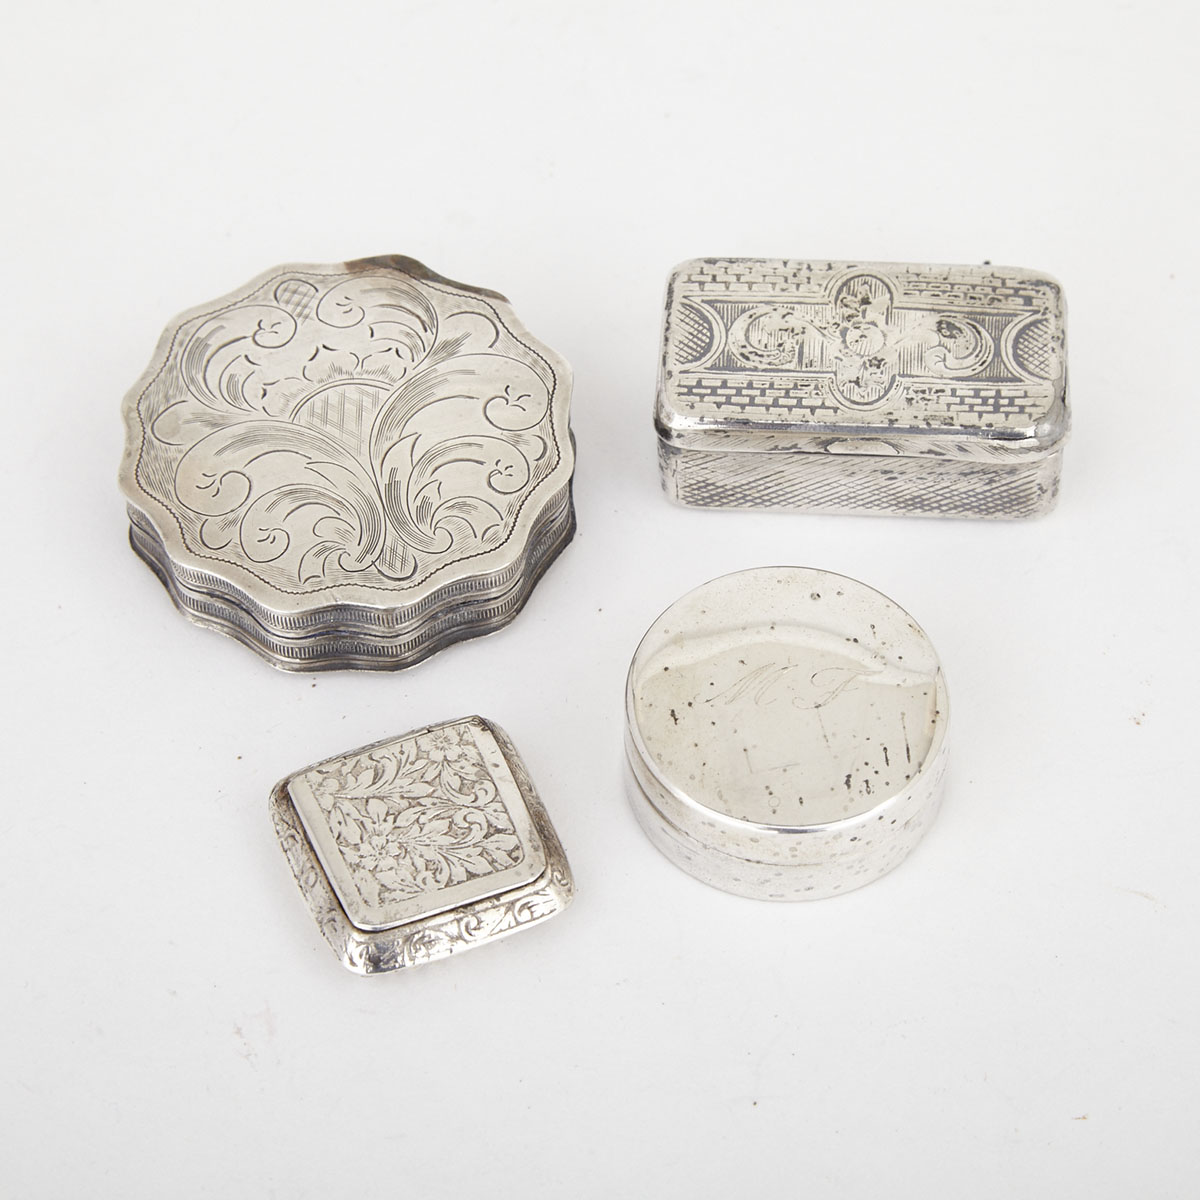 Four Various Silver Boxes, Italian (two), Dutch and Russian, Moscow, 1857 and later